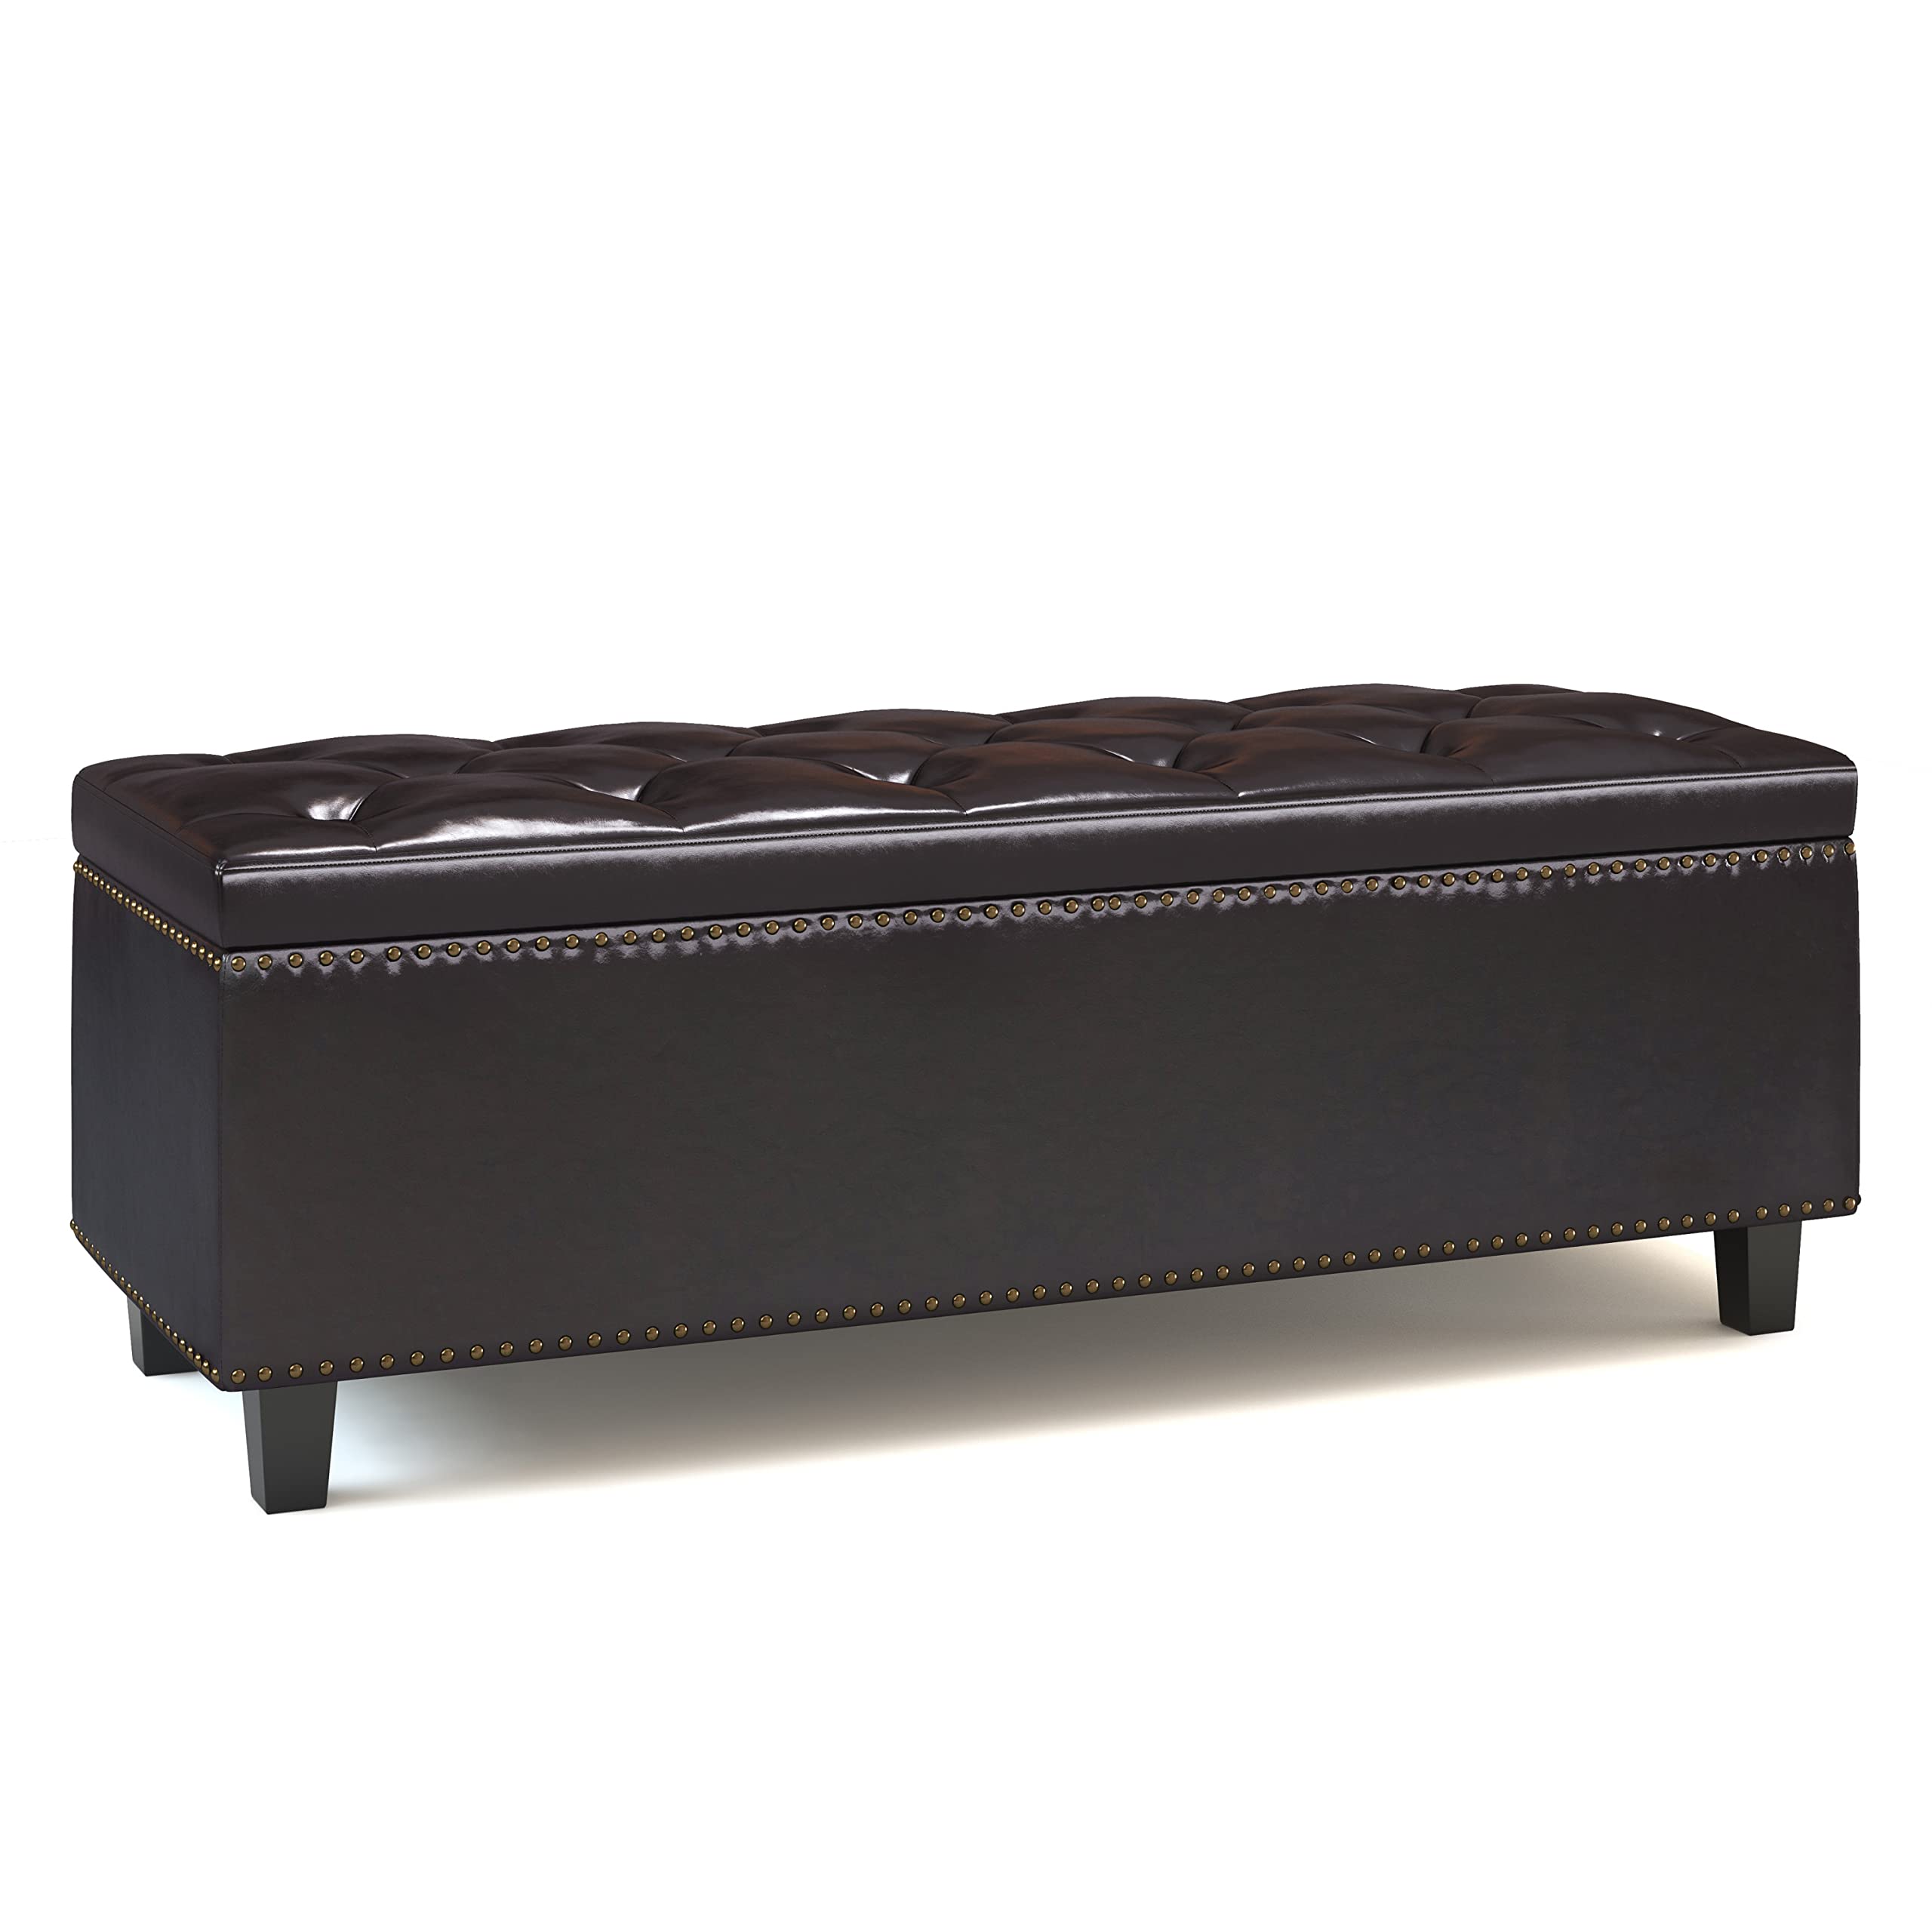 SIMPLIHOME Avalon 48in Lift Top Storage Ottoman Bench (Distressed Brown, Faux Leather) $83.82 + Free Shipping